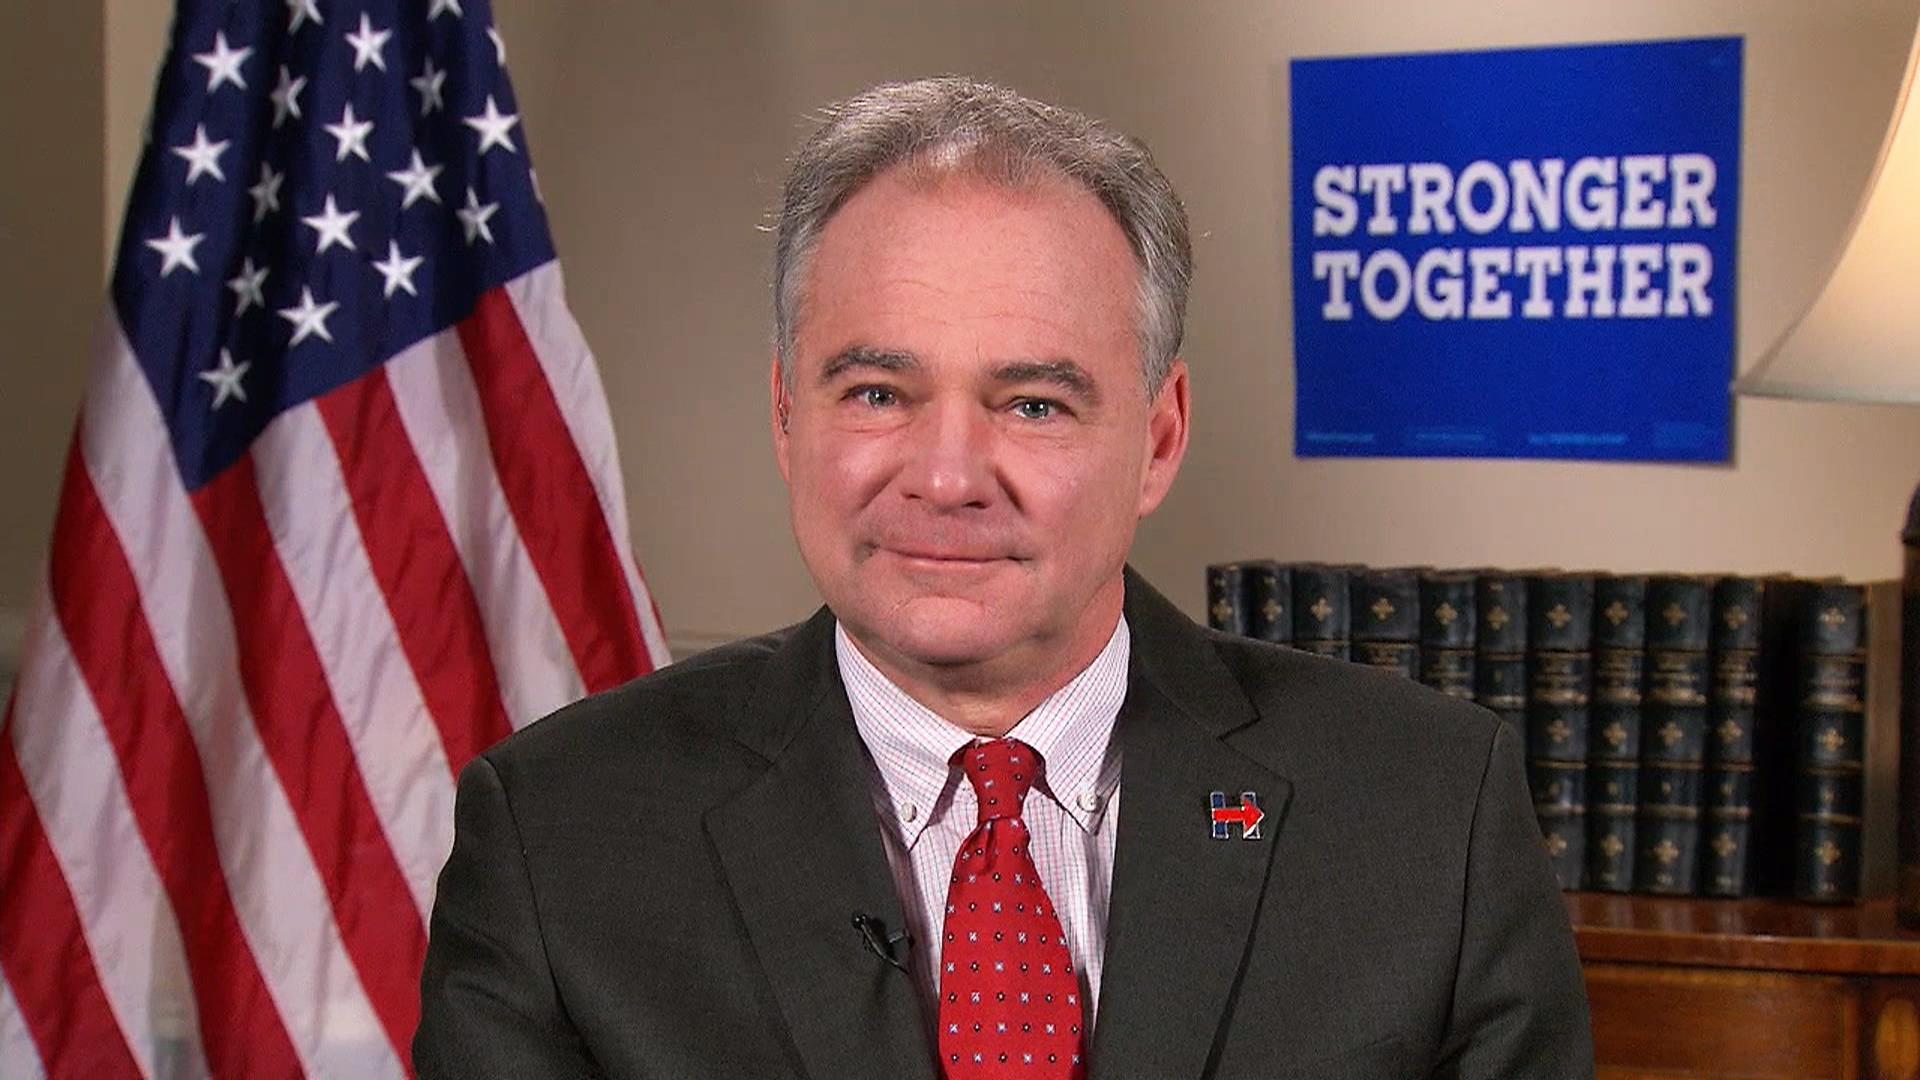 Tim Kaine: Accepting Election Results 'a Bedrock Pillar'